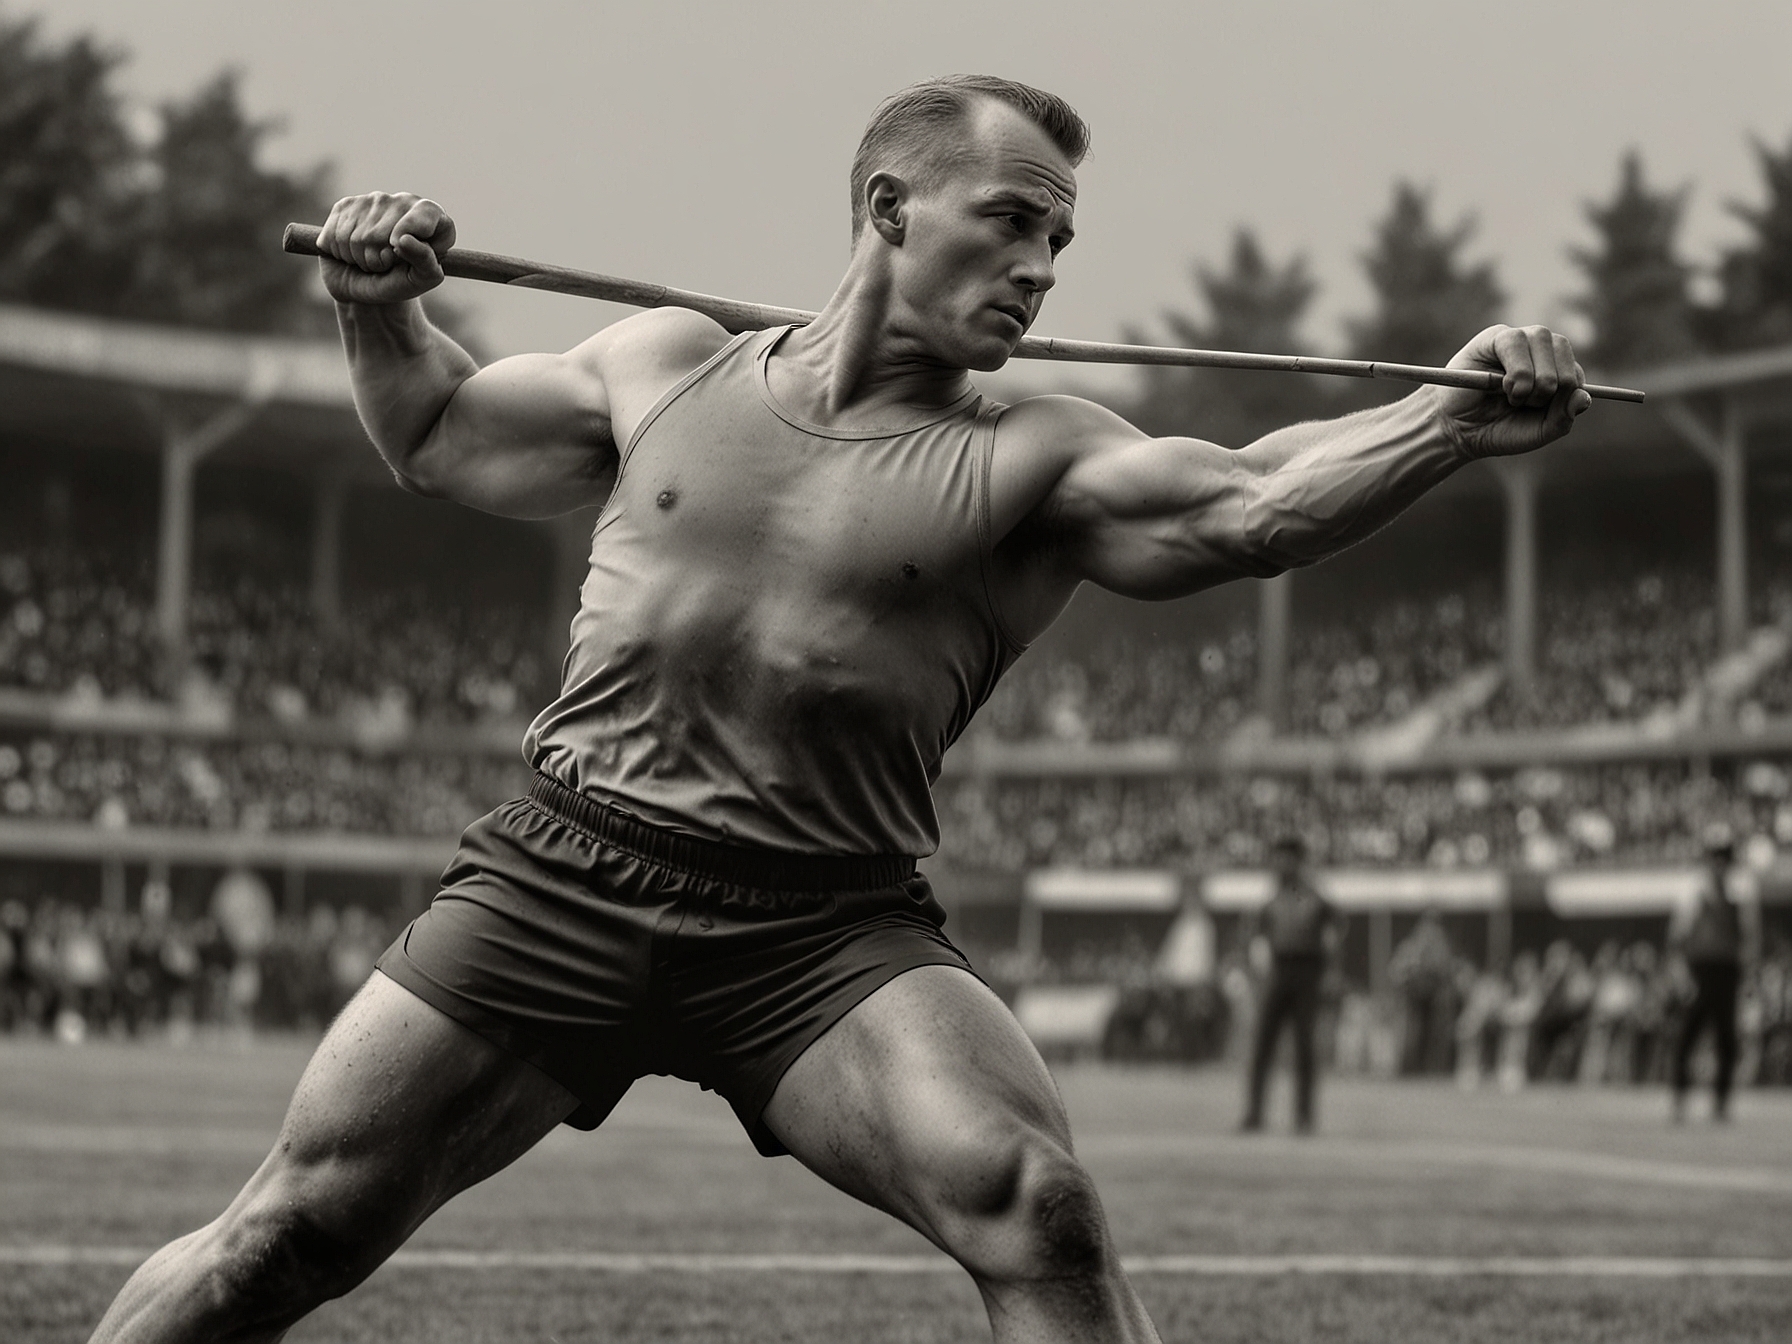 Max Dehning in action, preparing his throw during a javelin competition.